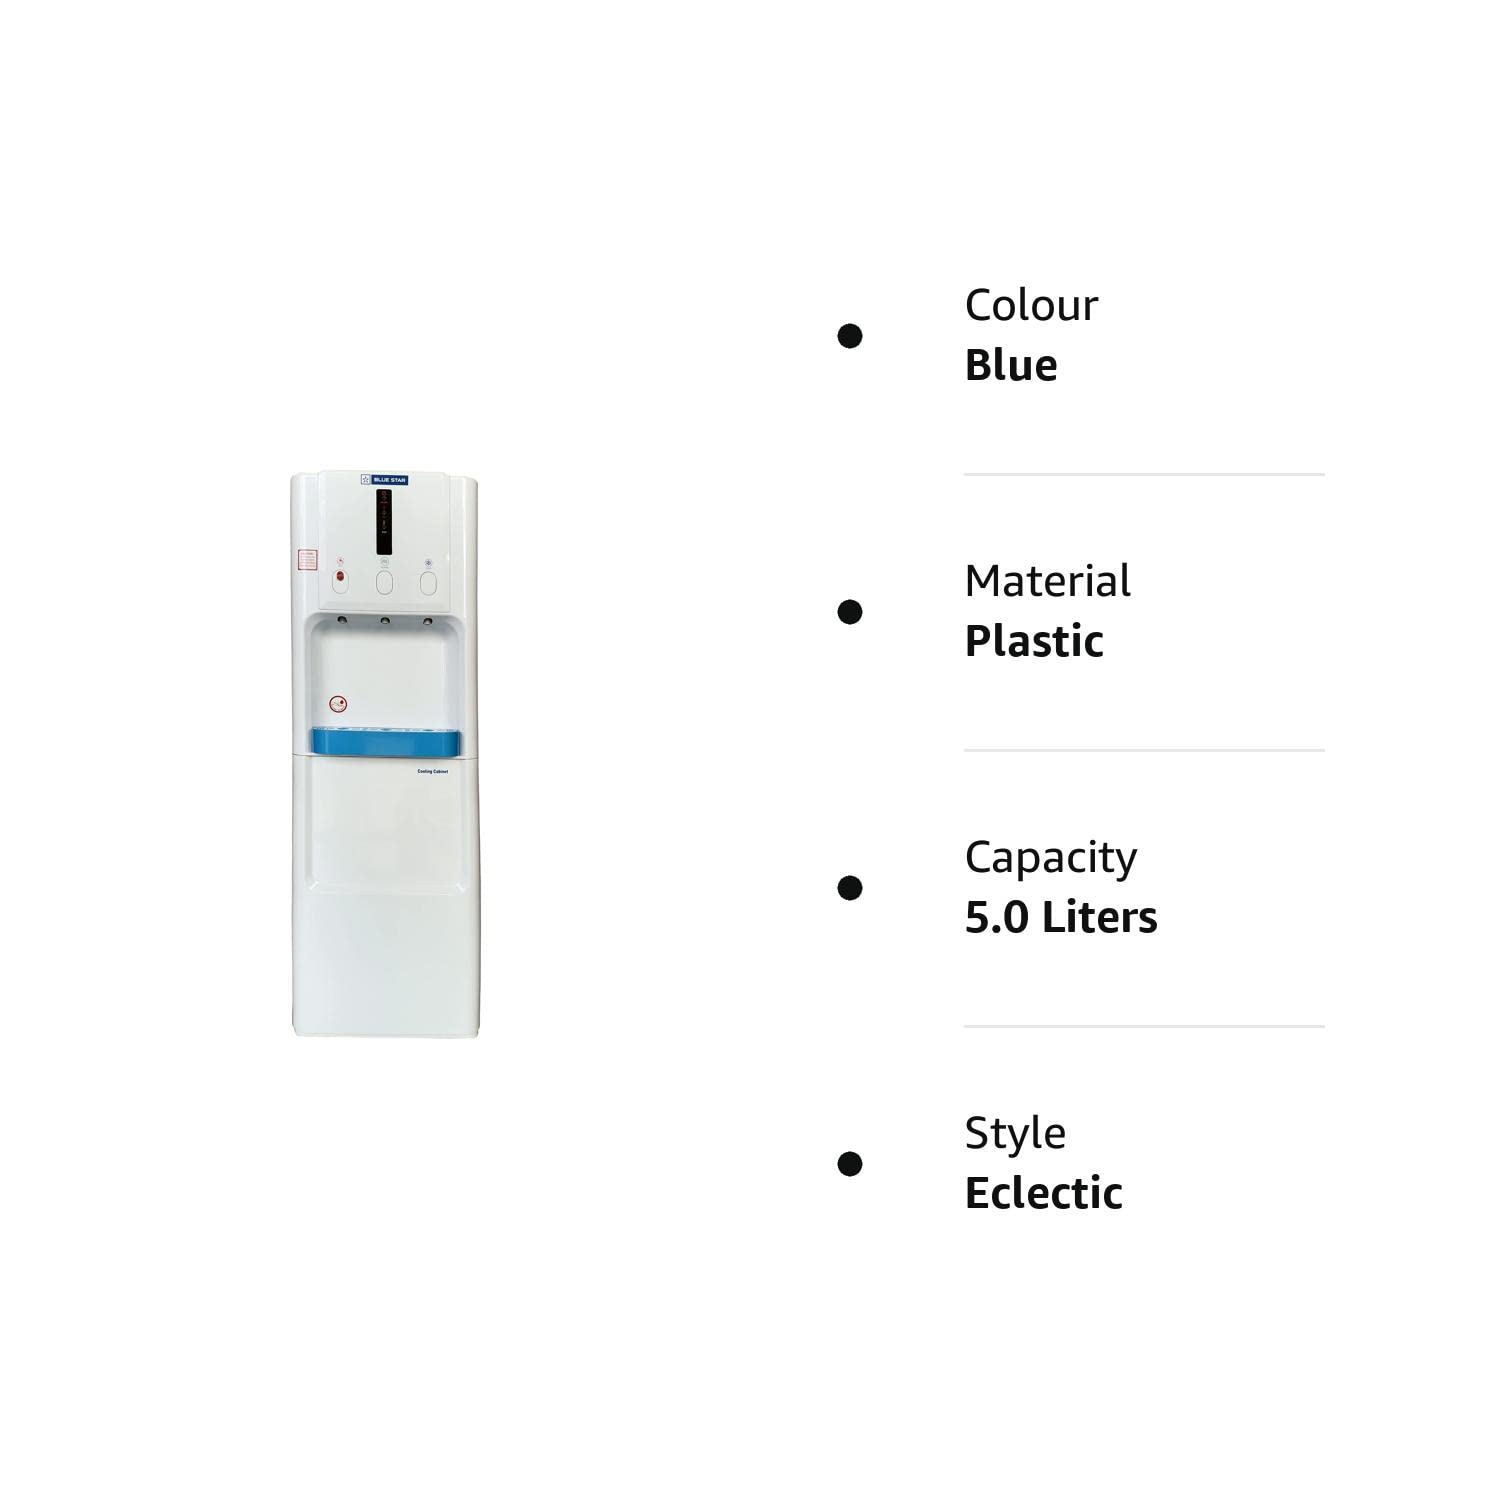 Blue star SDLX 150150 water Cooler Stainless steel body with 150 liter storage Mahajan Electronics Online